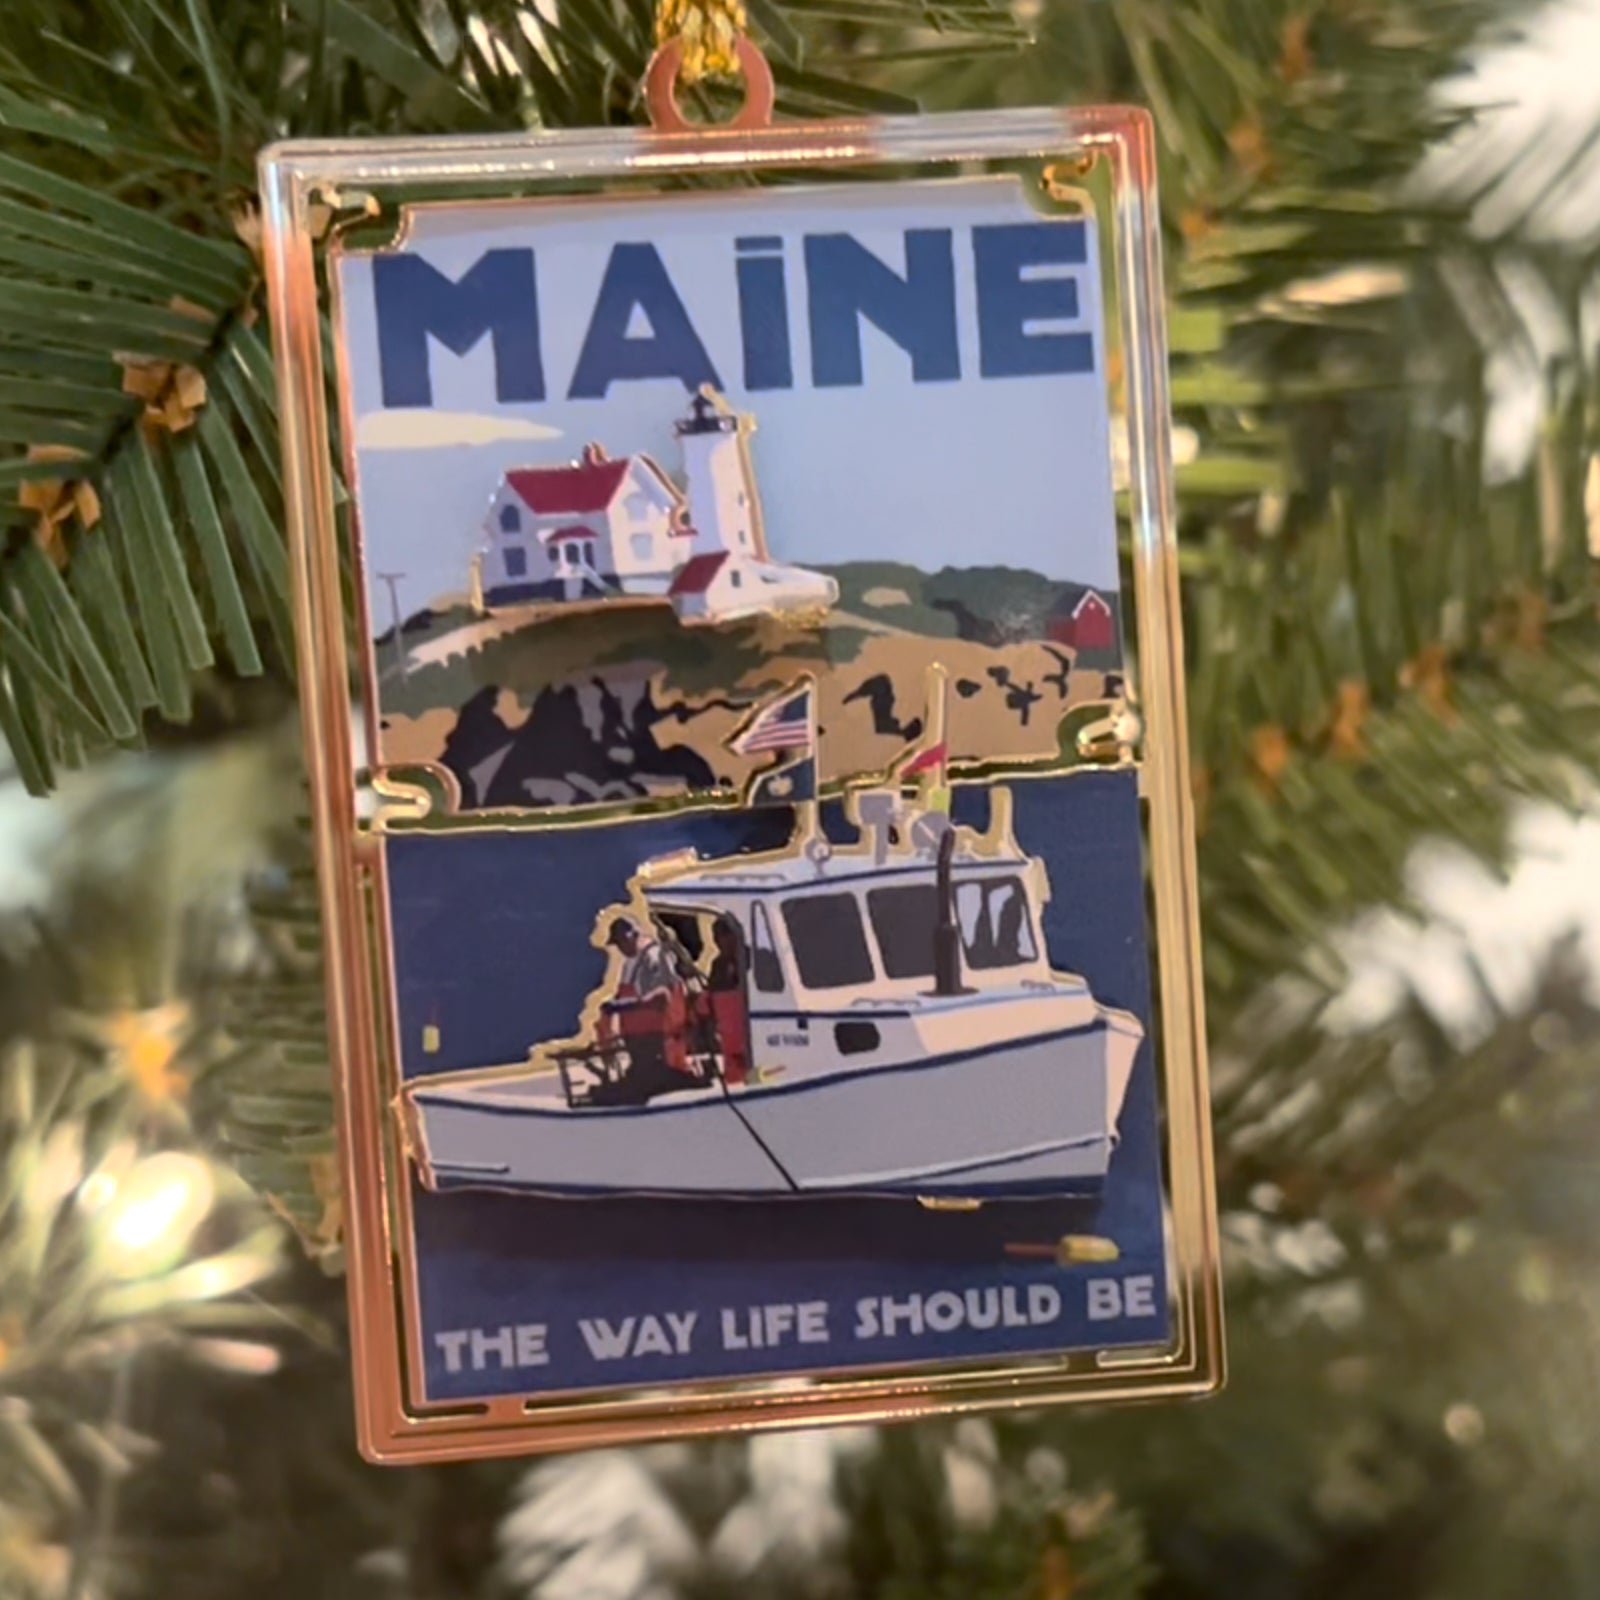 Lobstering At The Nubble - MAINE The Way Life Should Be - Christmas Ornament - Cape Neddick Nubble Lighthouse Maine